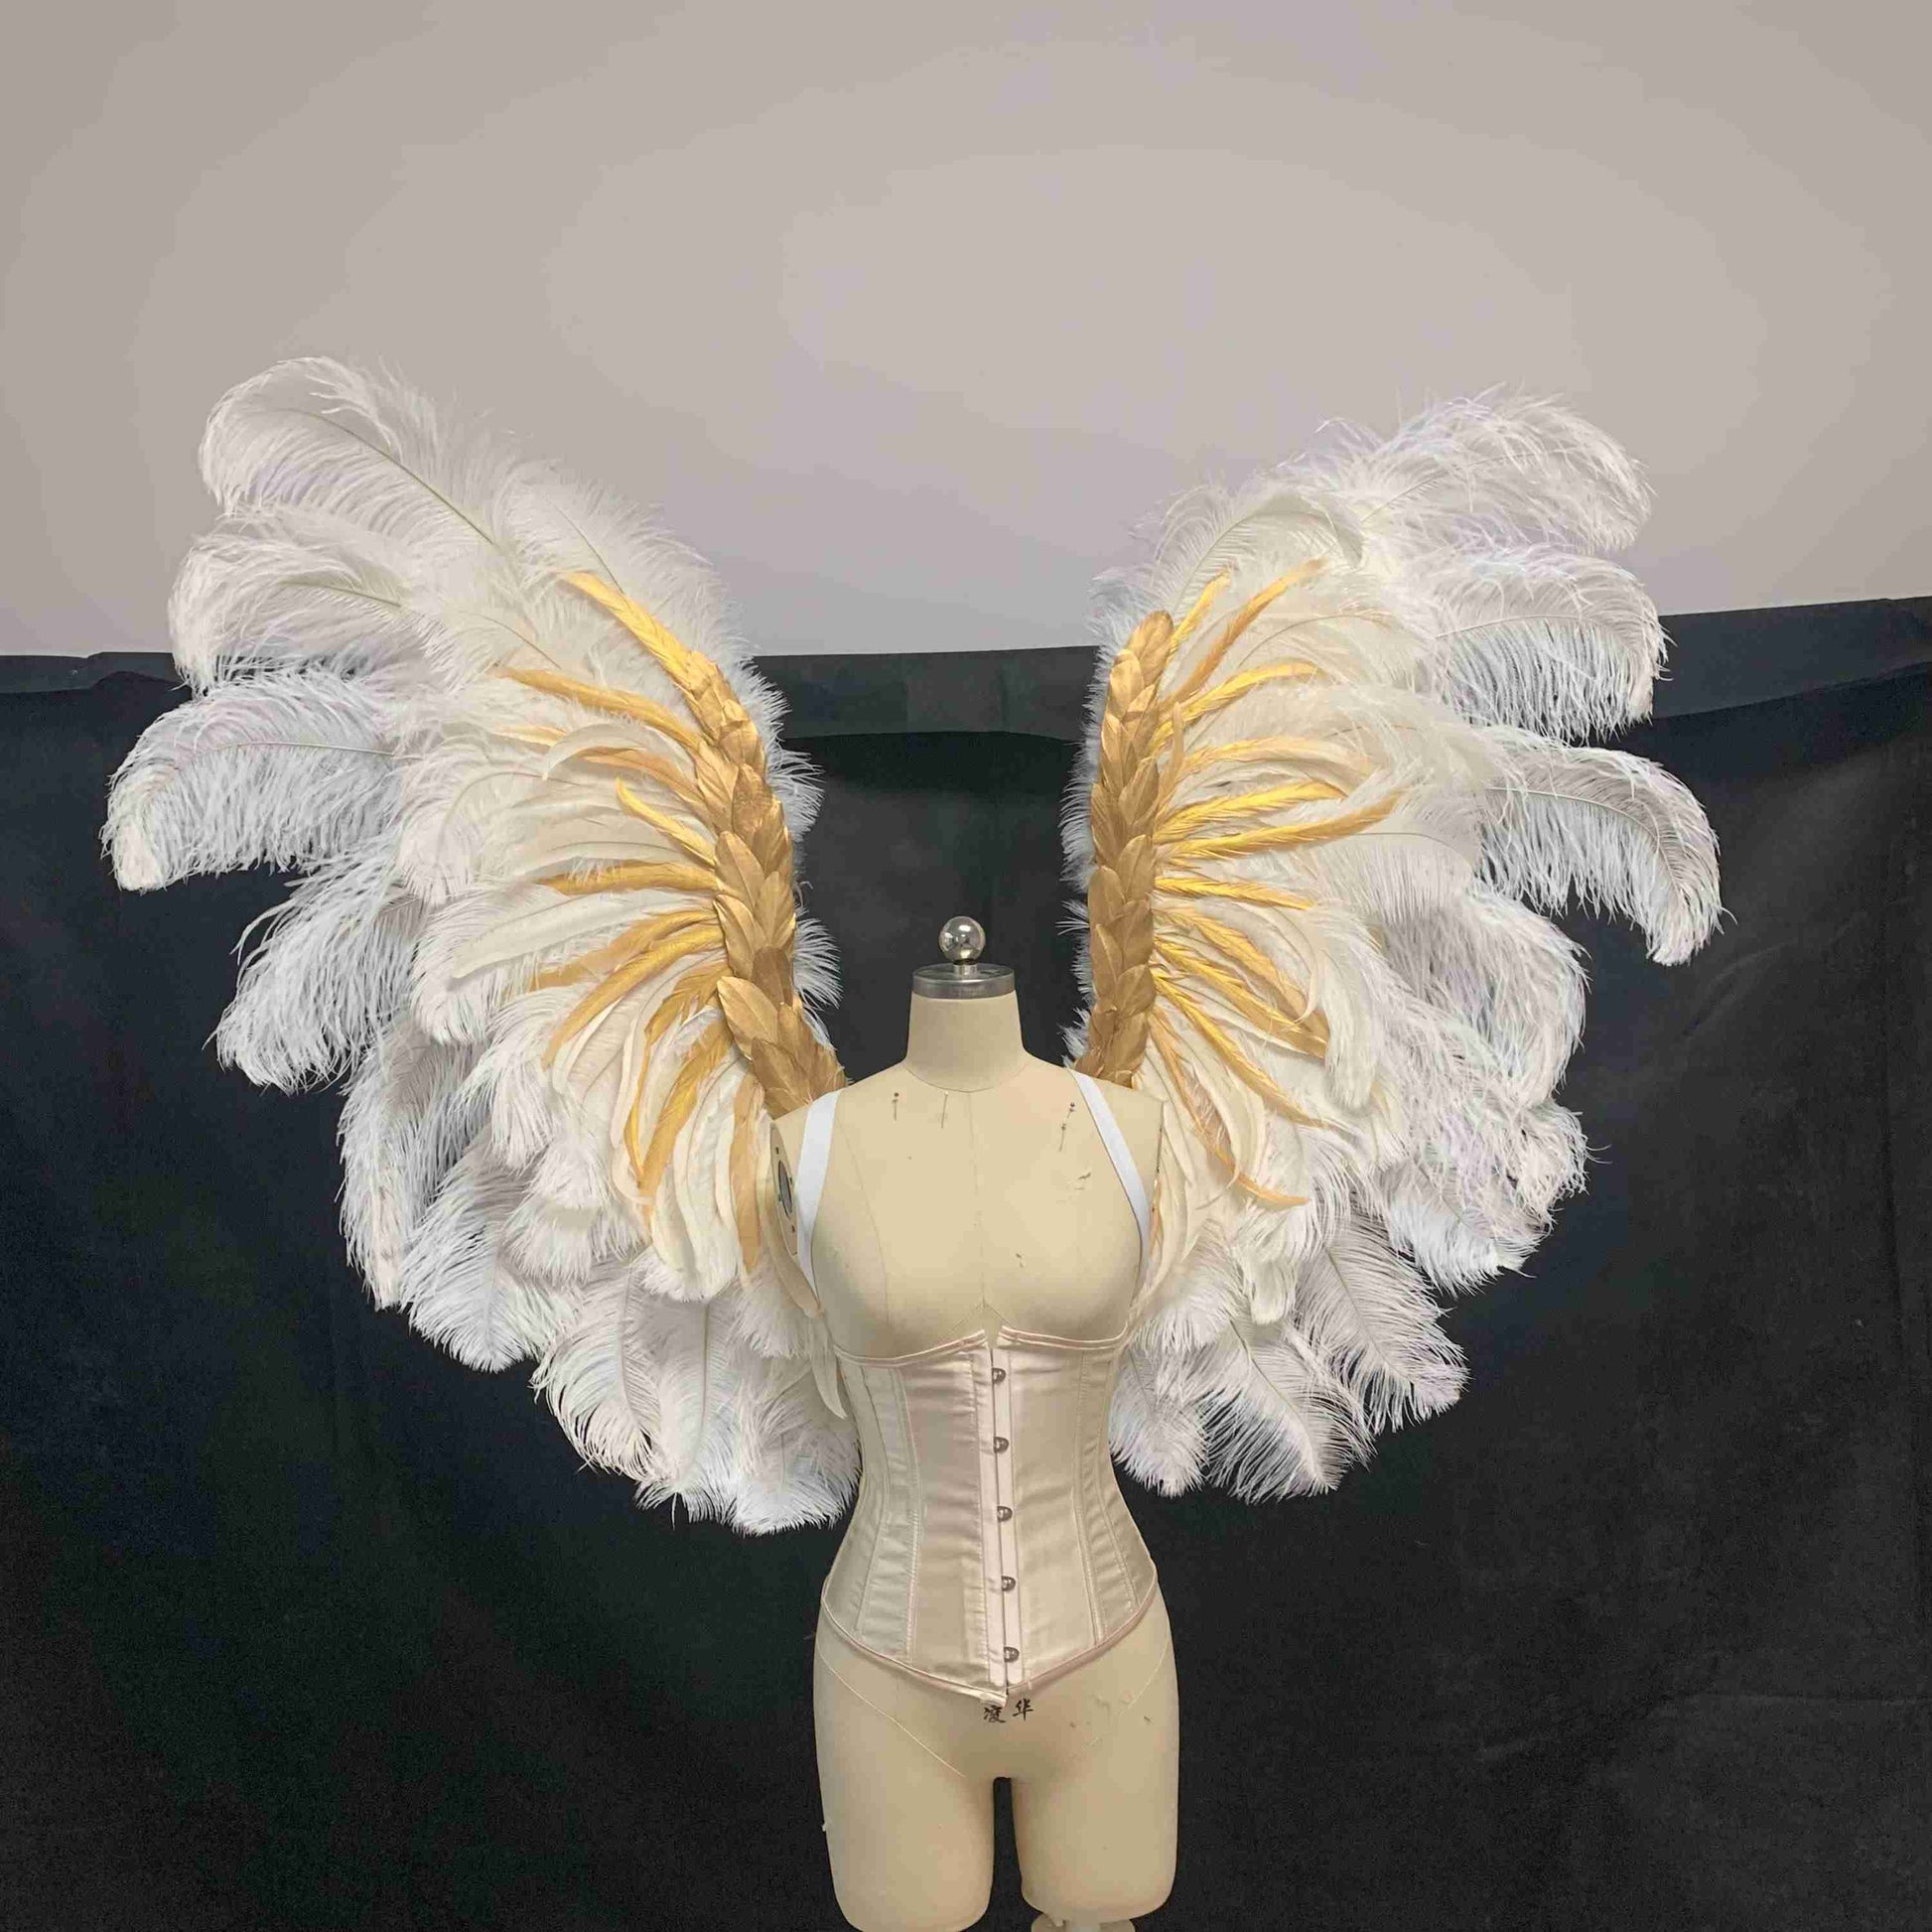 Our white angel wings from the front. Made from ostrich feathers. Wings for angel costume. Suitable for boudoir photoshoots.